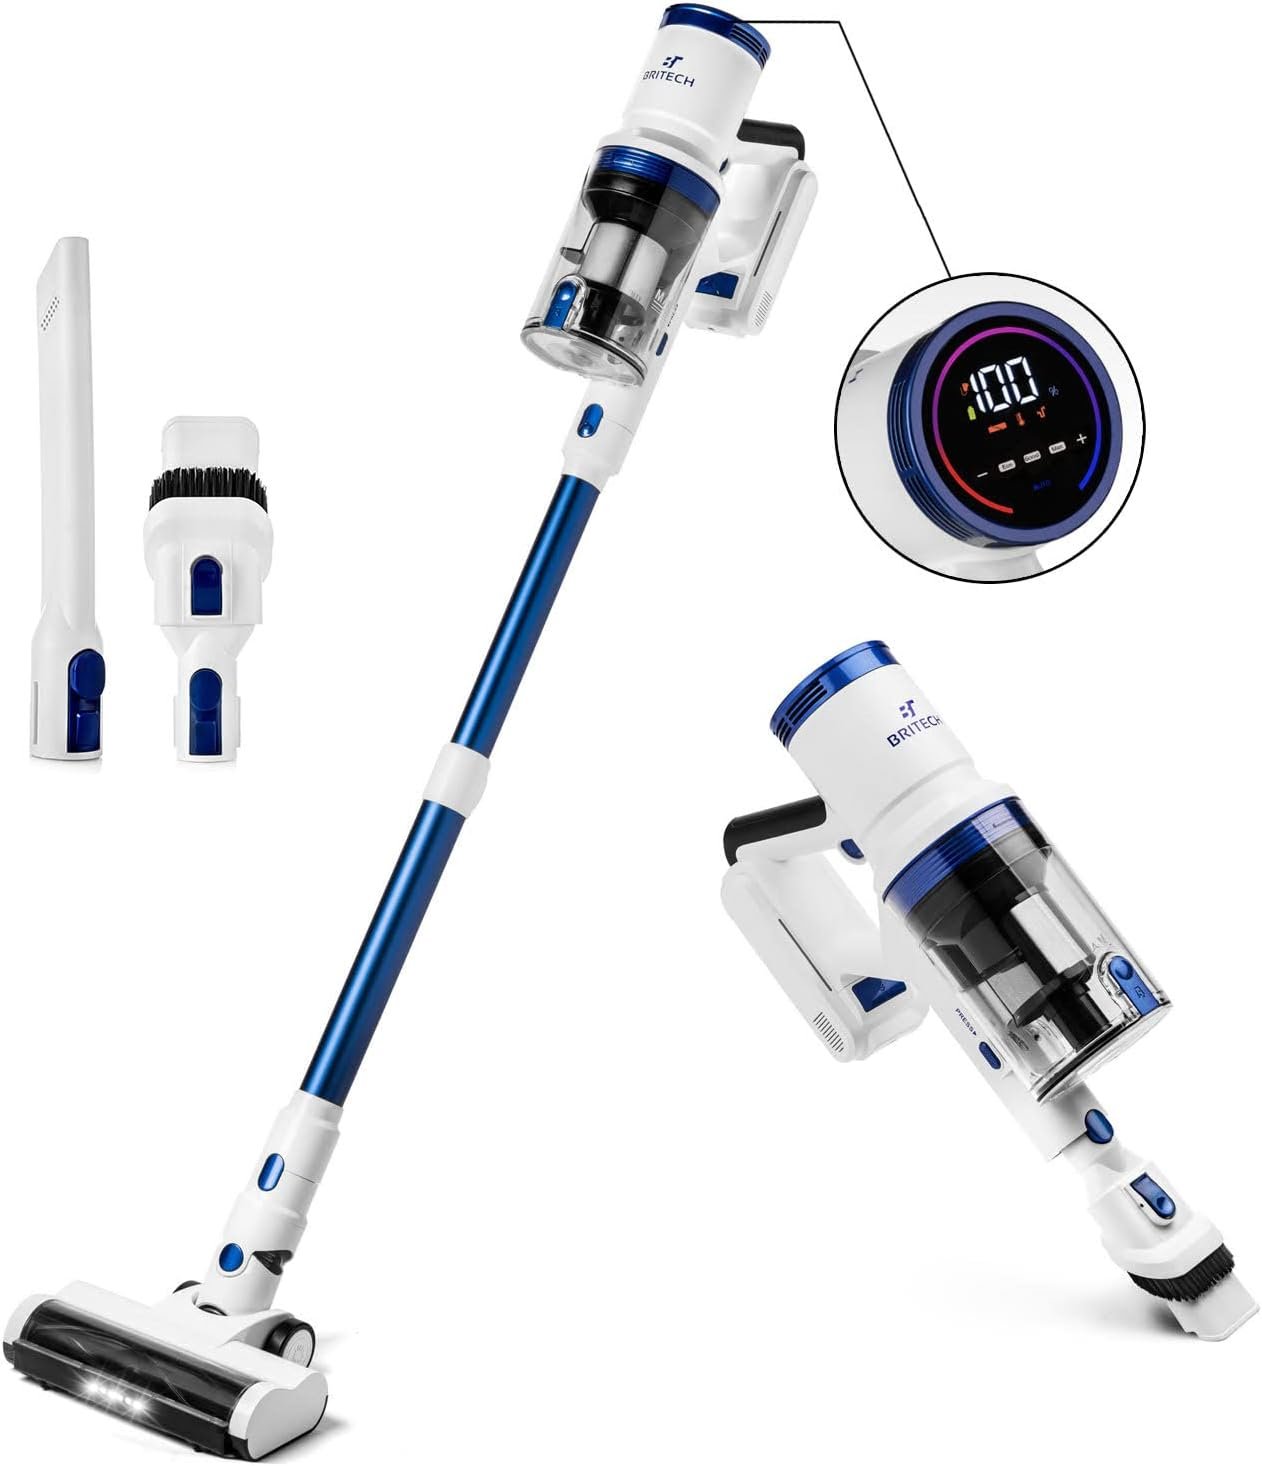 BRITECH Cordless Lightweight Stick Vacuum Cleaner, 300W Motor for Powerful Suction 40min Runtime, LED Display Screen & Headlights, Great for Carpet Cleaner, Hardwood Floor & Pet Hair (Blue)